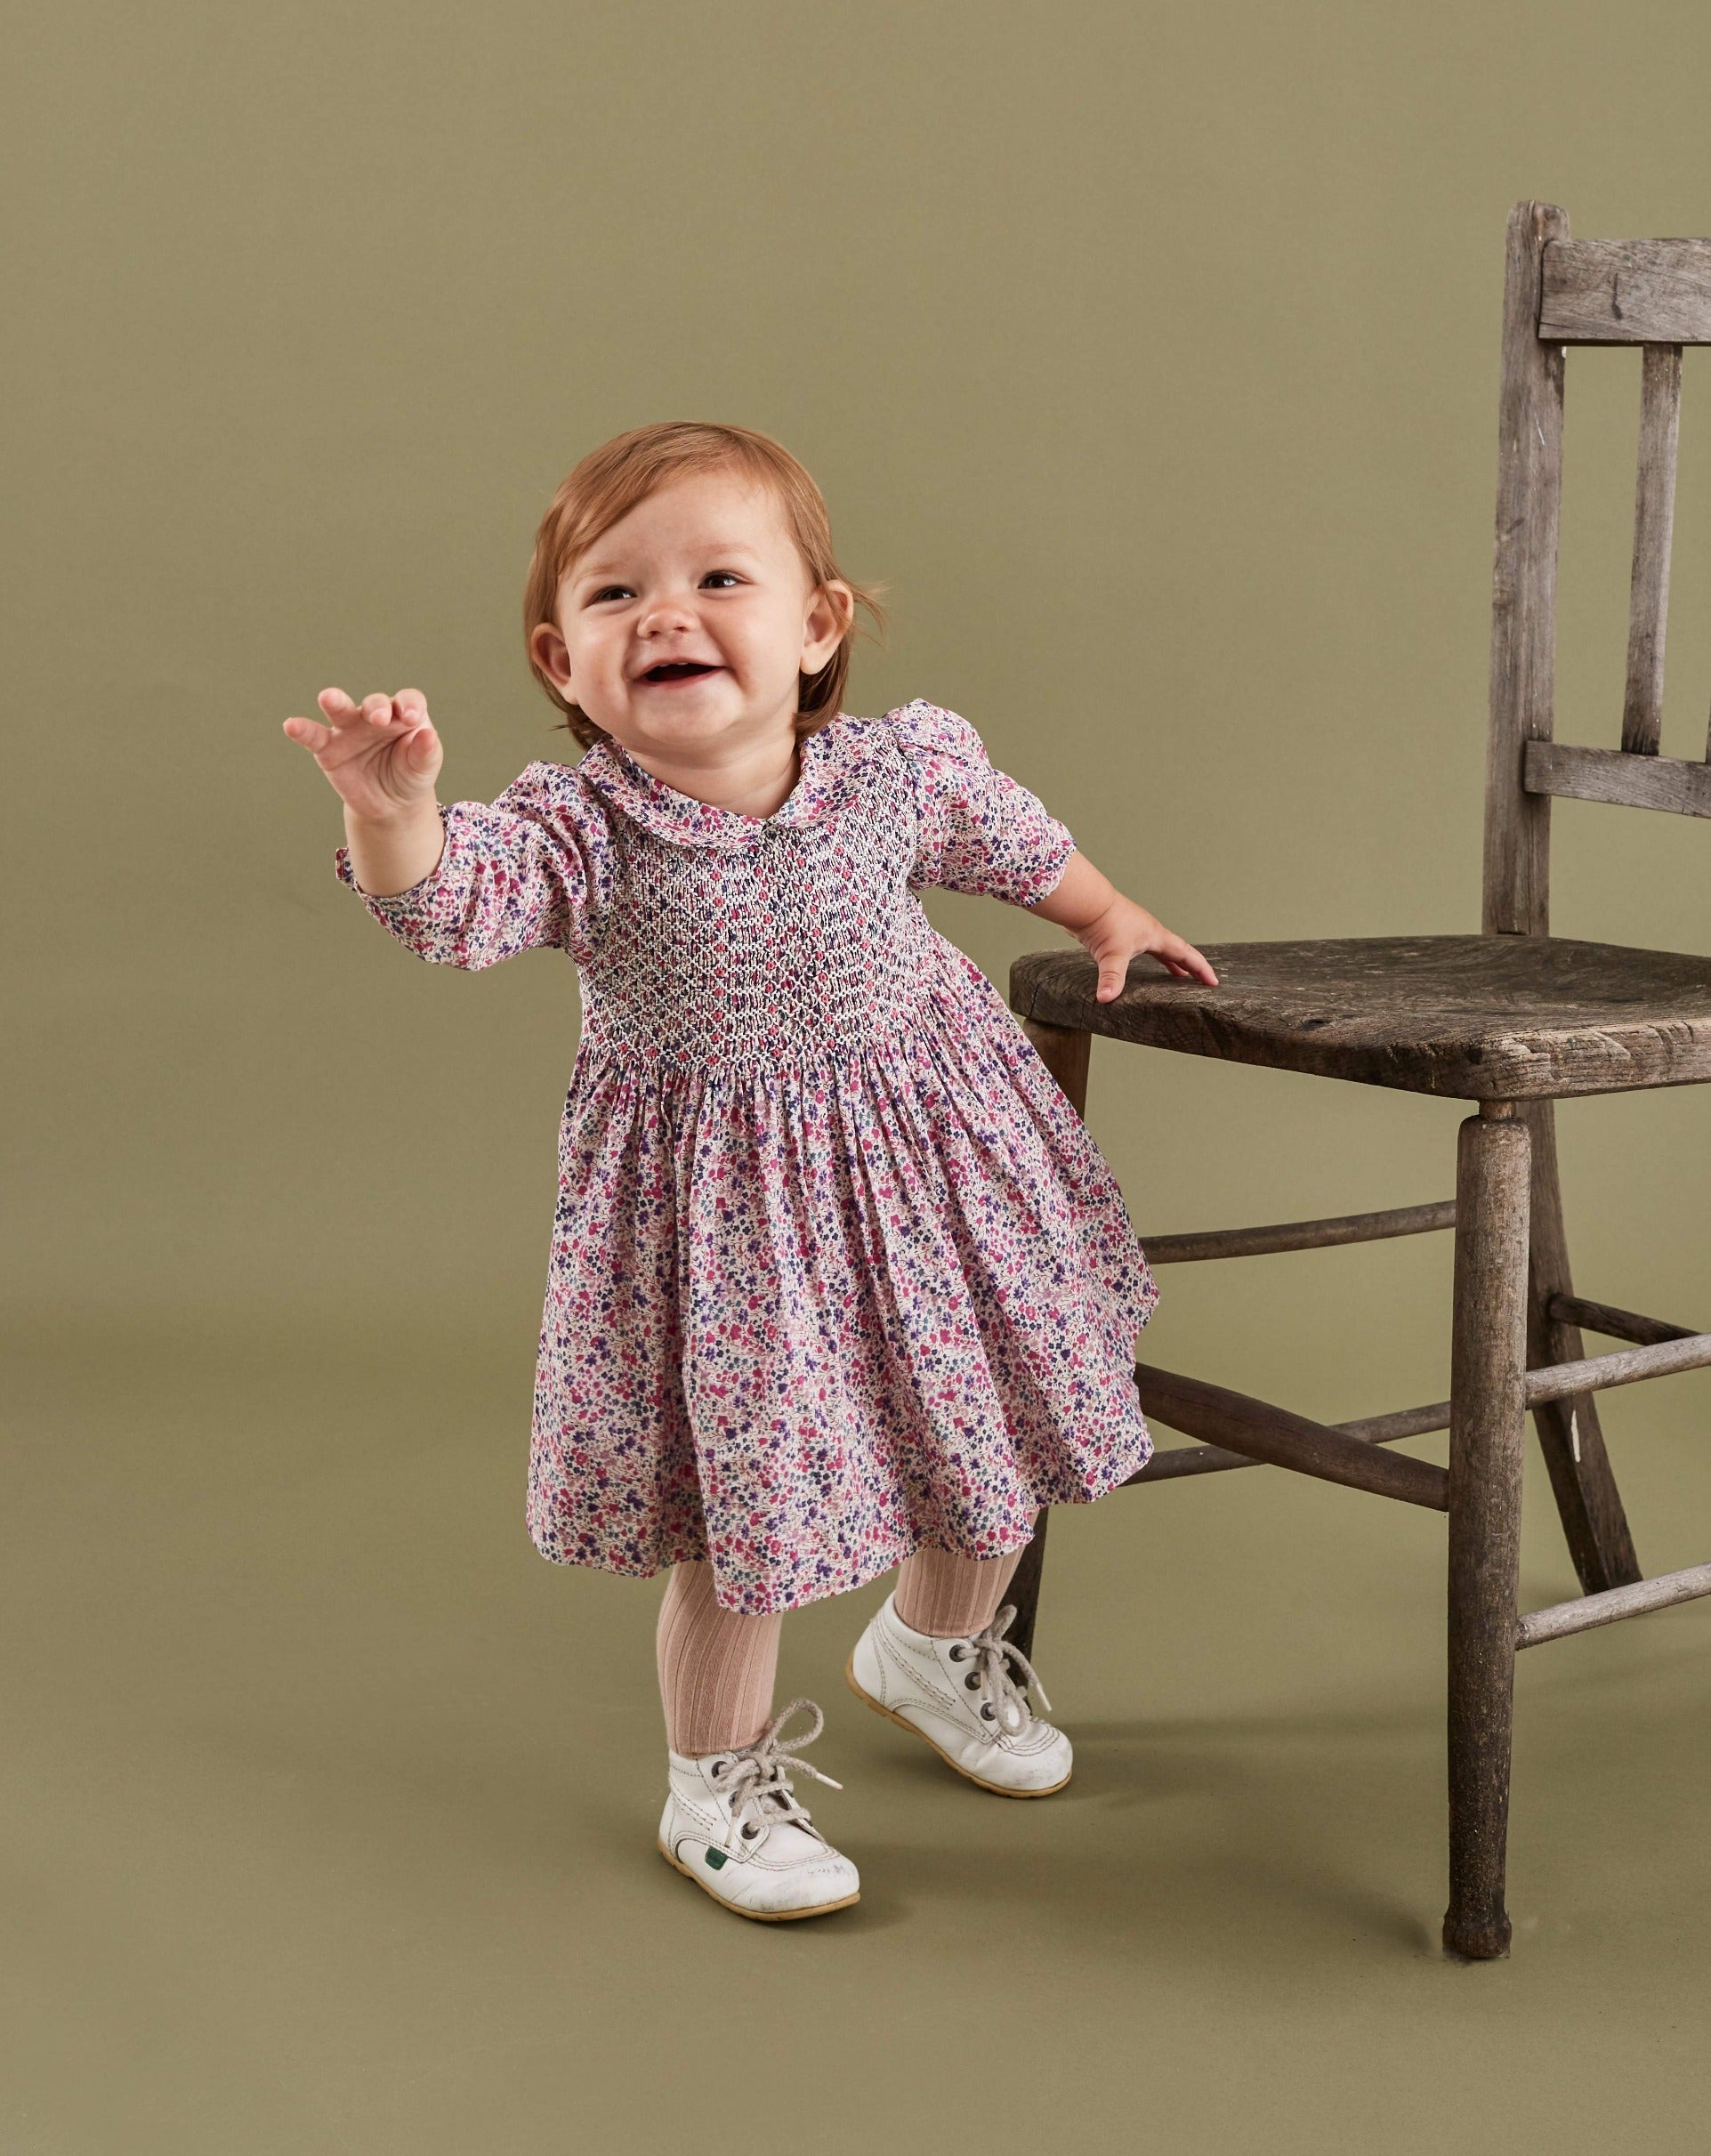 toddler standing next to chair, wearing a floral smocked dress